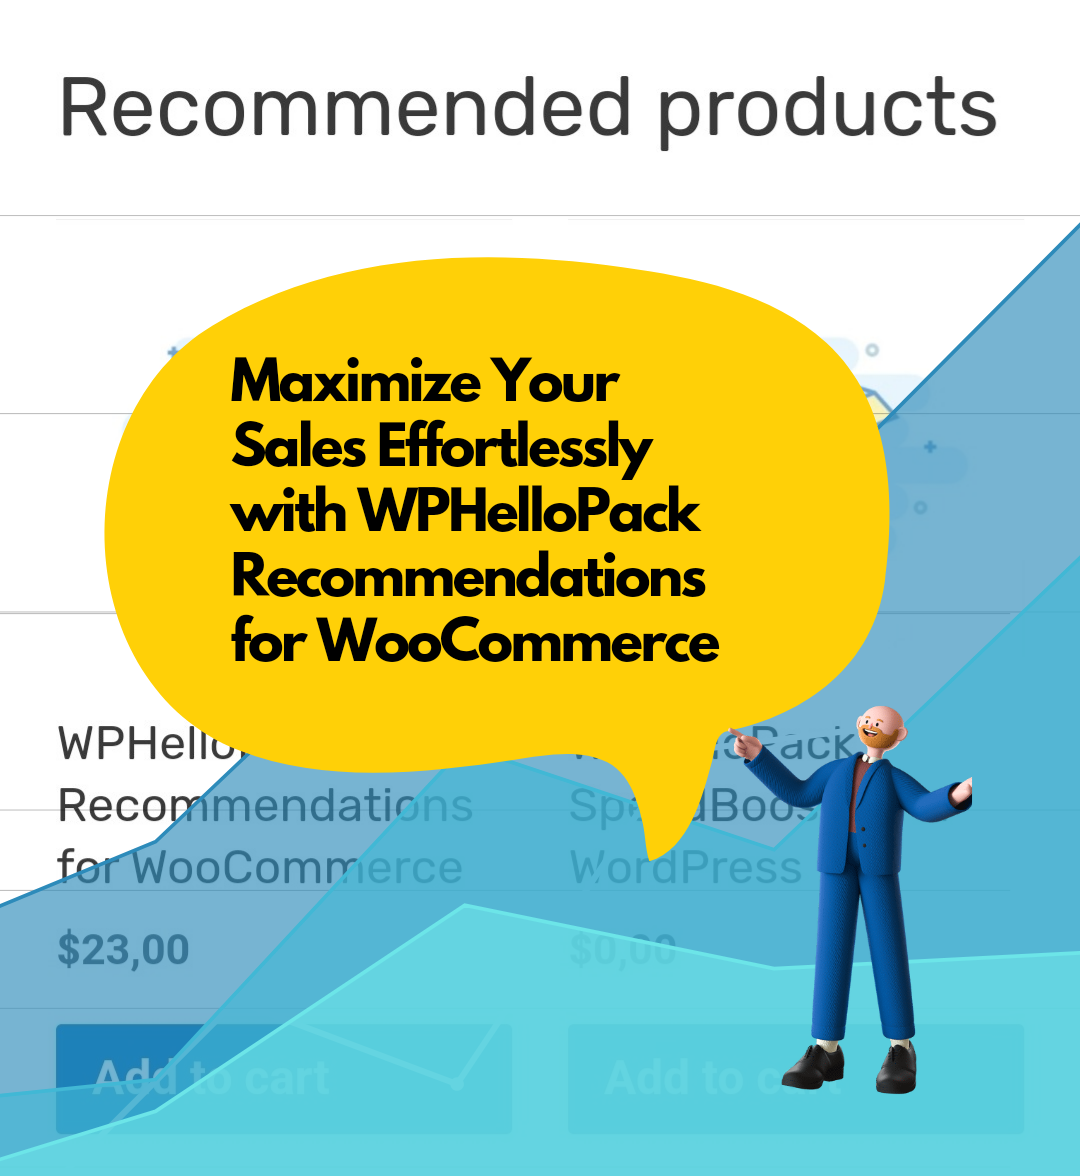 WPHelloPack Recommendations for WooCommerce